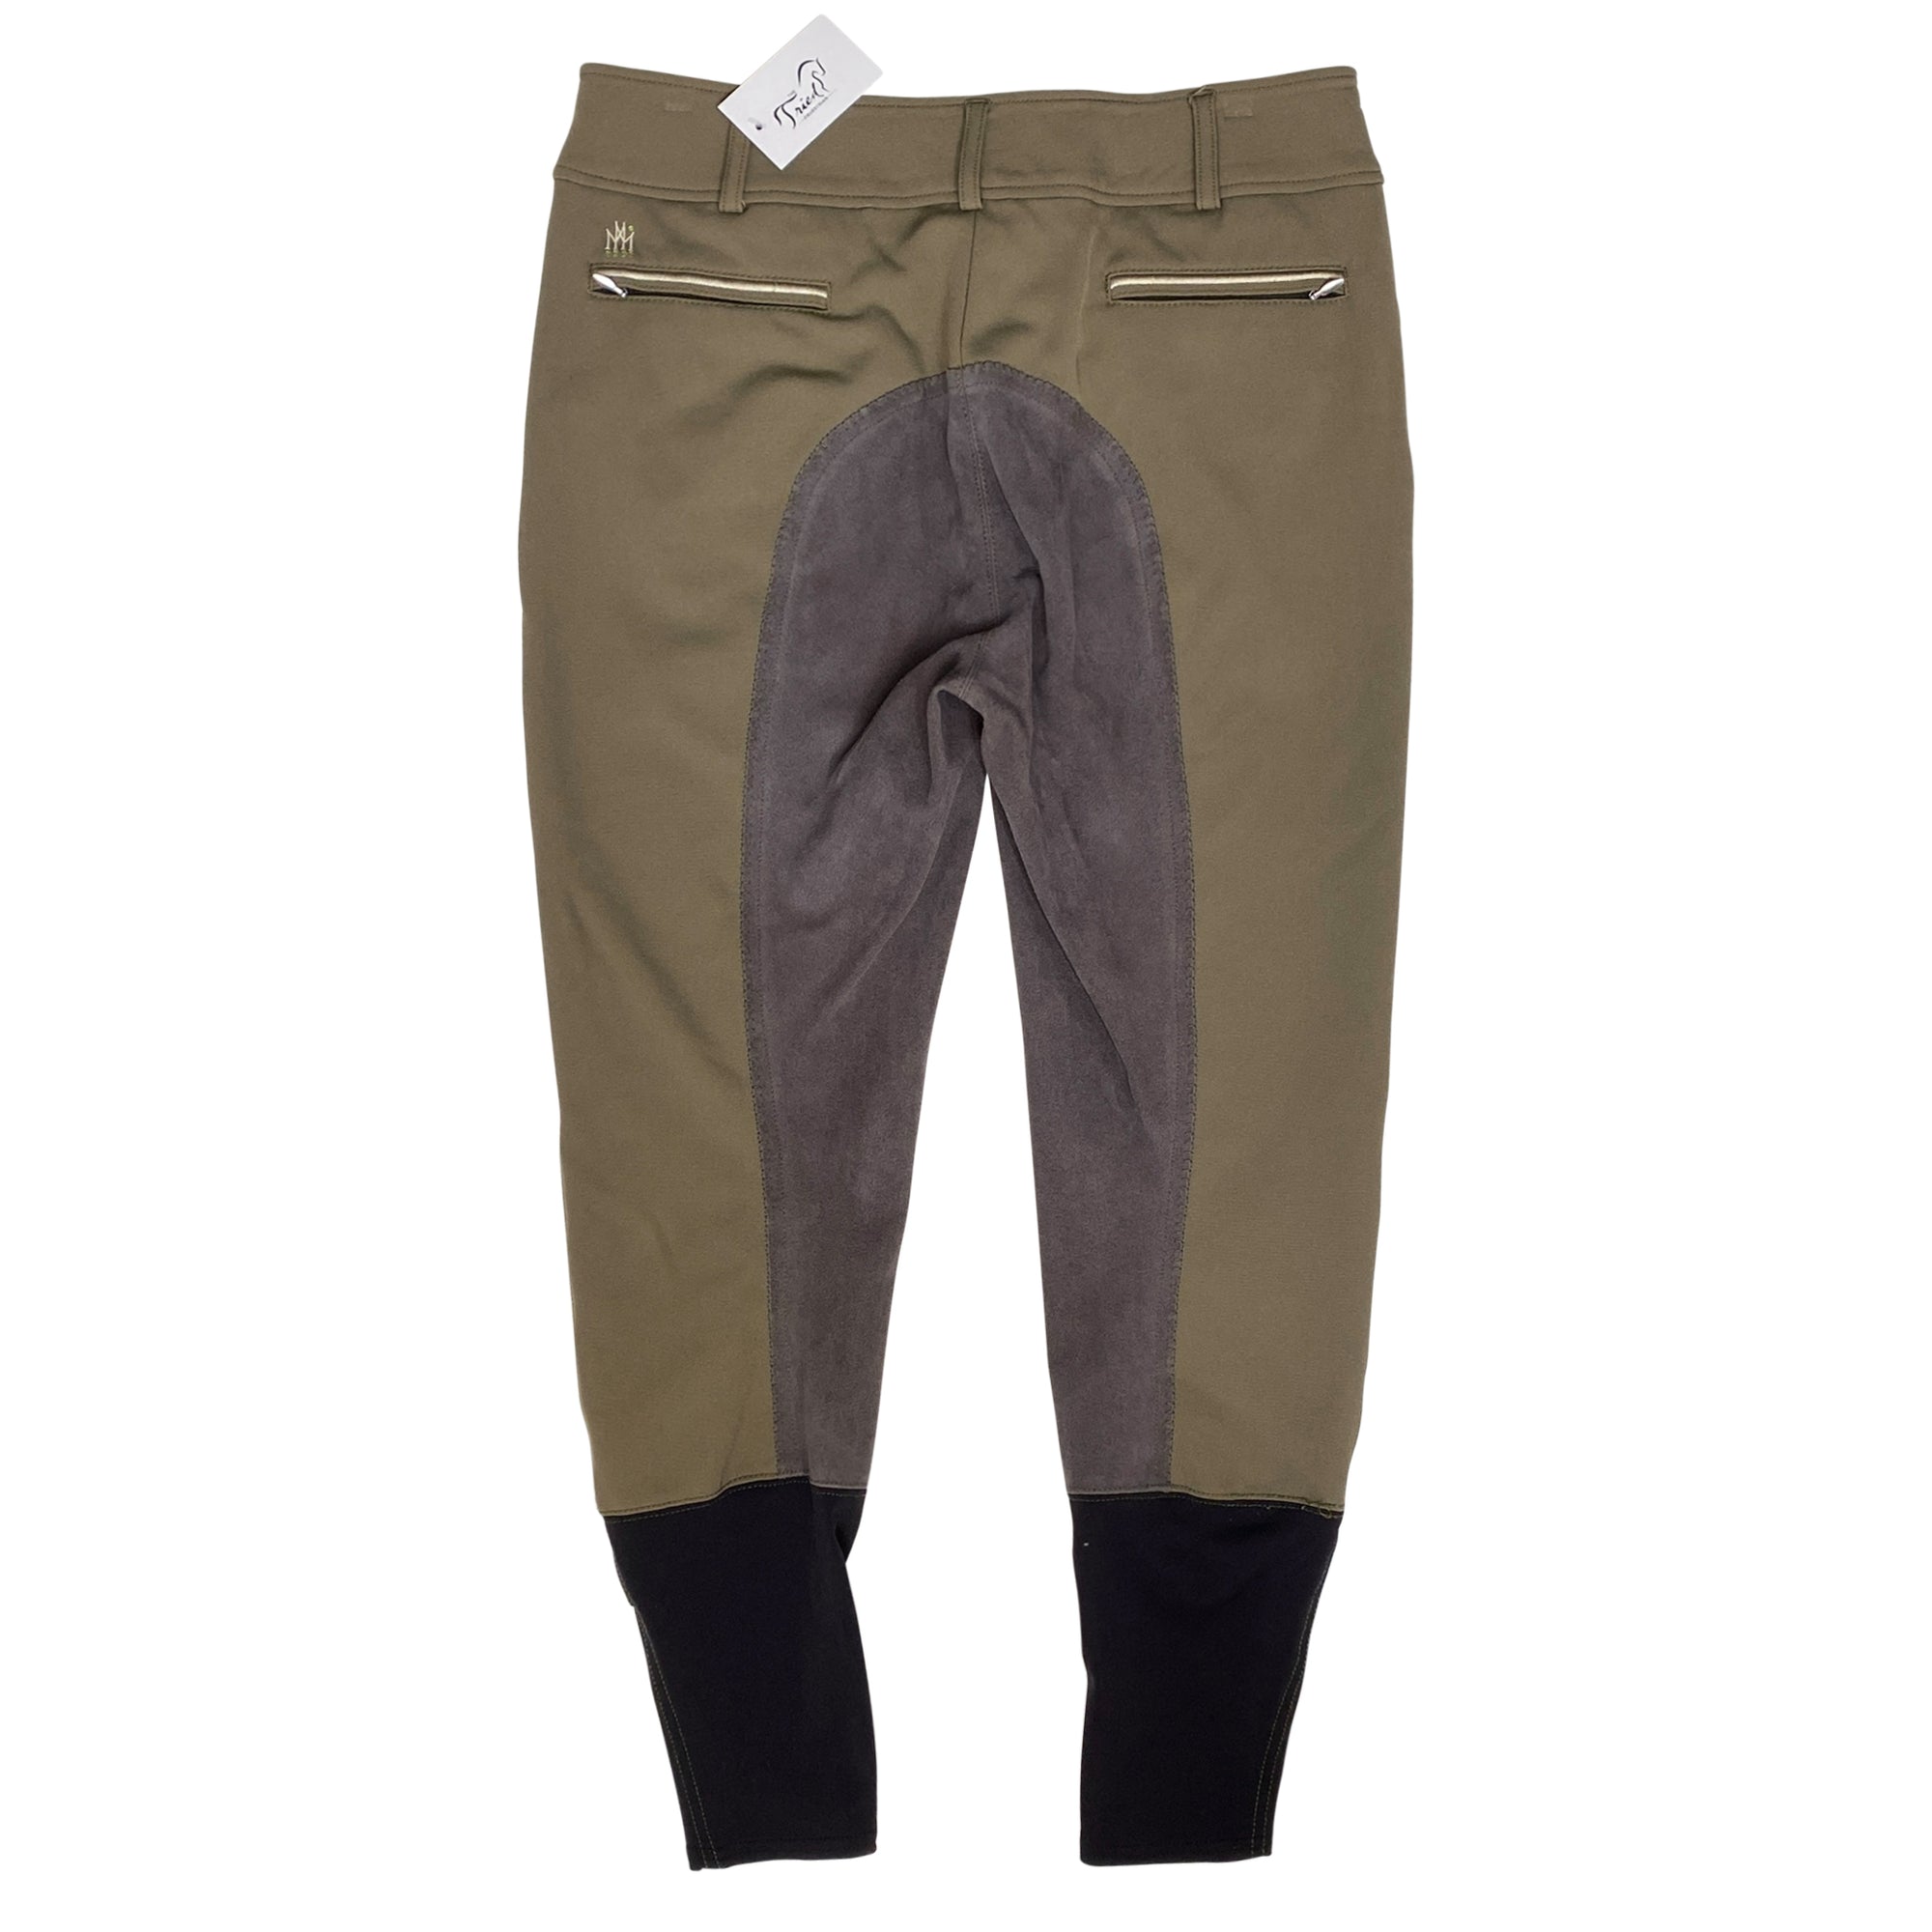 Mastermind Full Seat Breeches in Olive Green